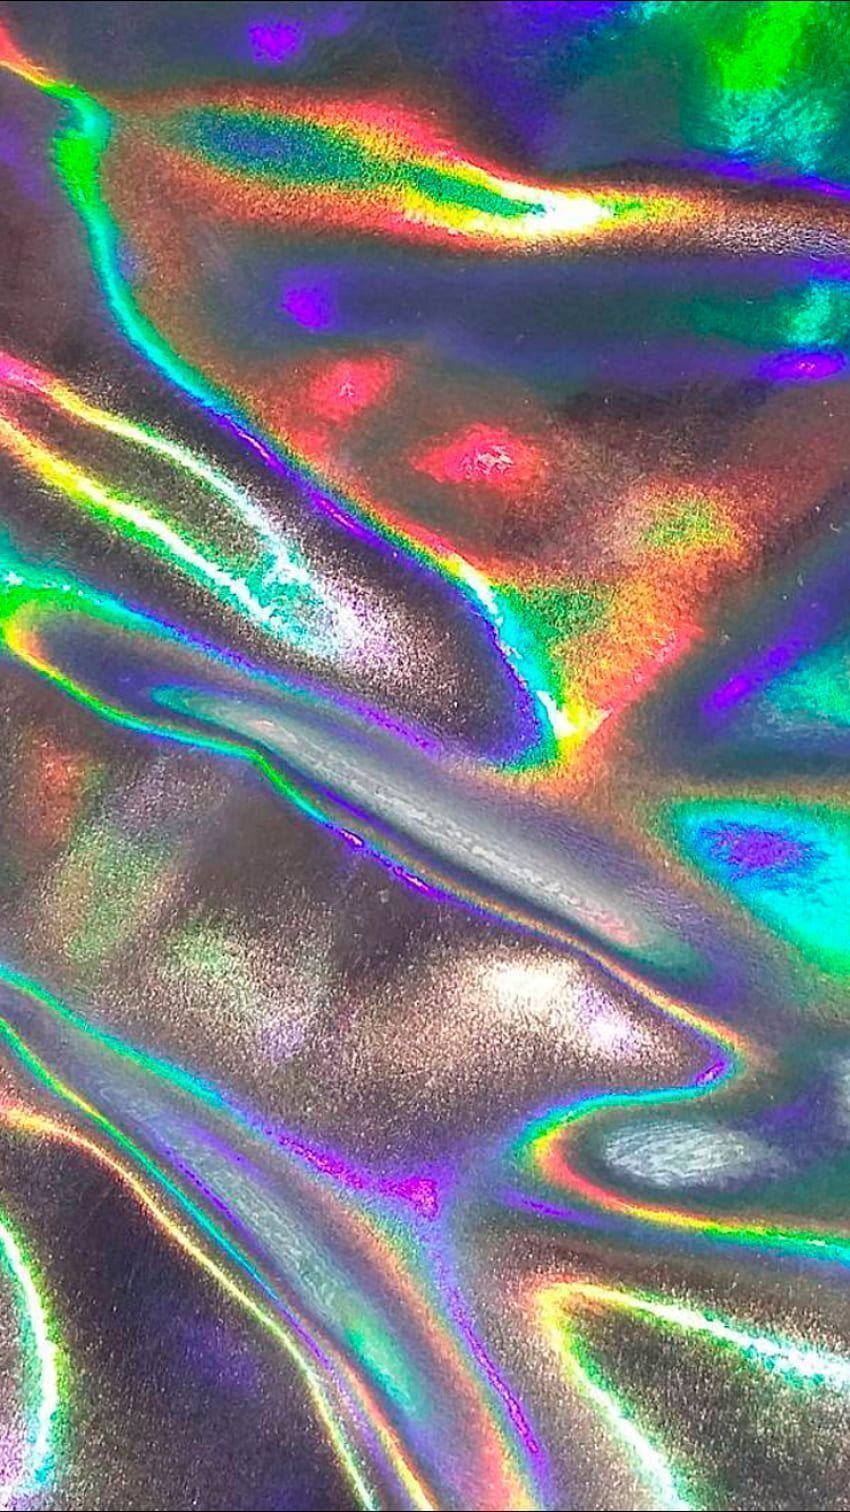 Holographic Iphone Wallpaper with high-resolution 1080x1920 pixel. You can use this wallpaper for your iPhone 5, 6, 7, 8, X, XS, XR backgrounds, Mobile Screensaver, or iPad Lock Screen - Holographic, iridescent